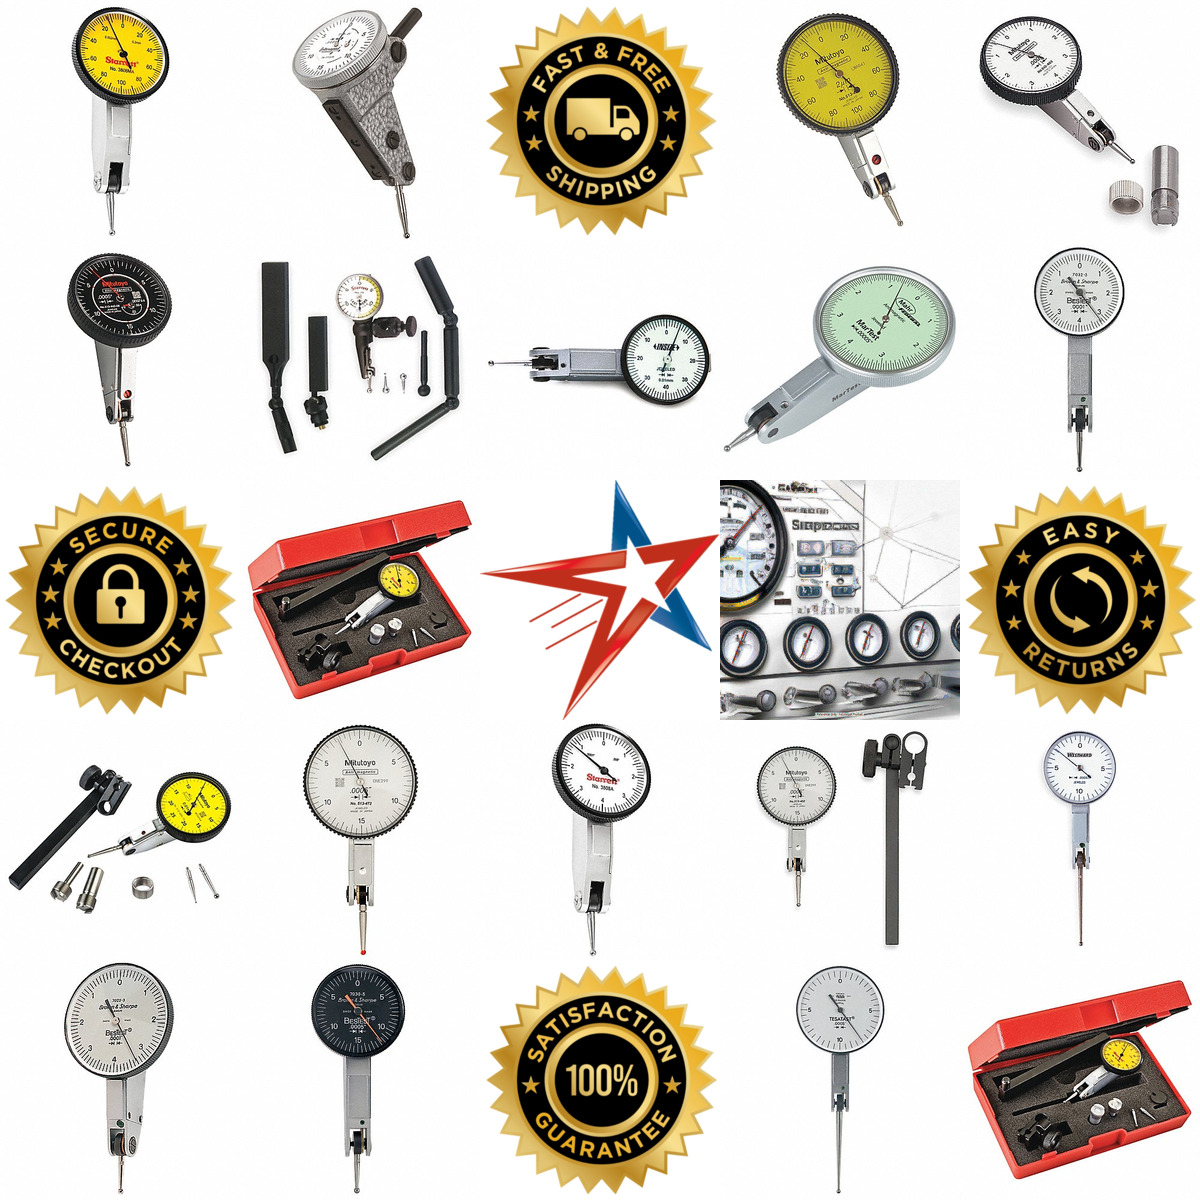 A selection of Dial Test Indicators and Sets products on GoVets